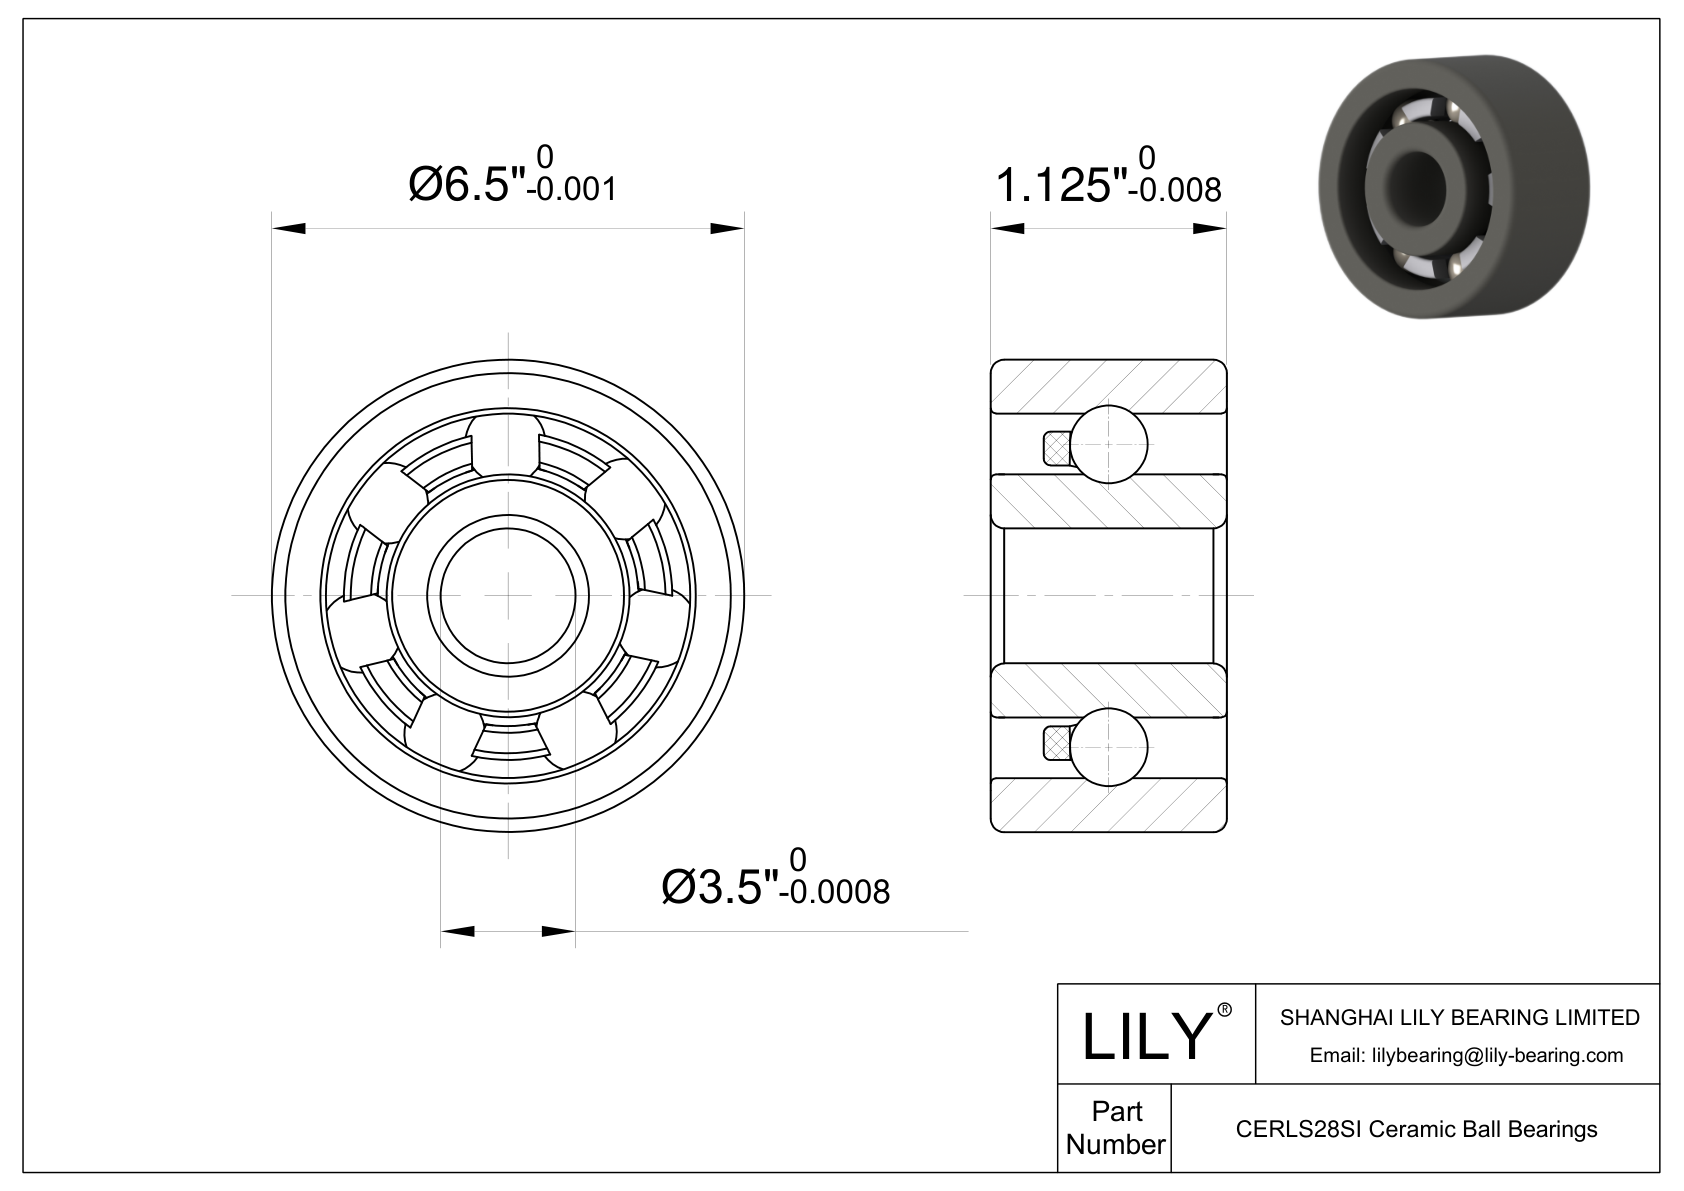 CESI RLS28 Inch Size Silicon Nitride Ceramic Bearings cad drawing